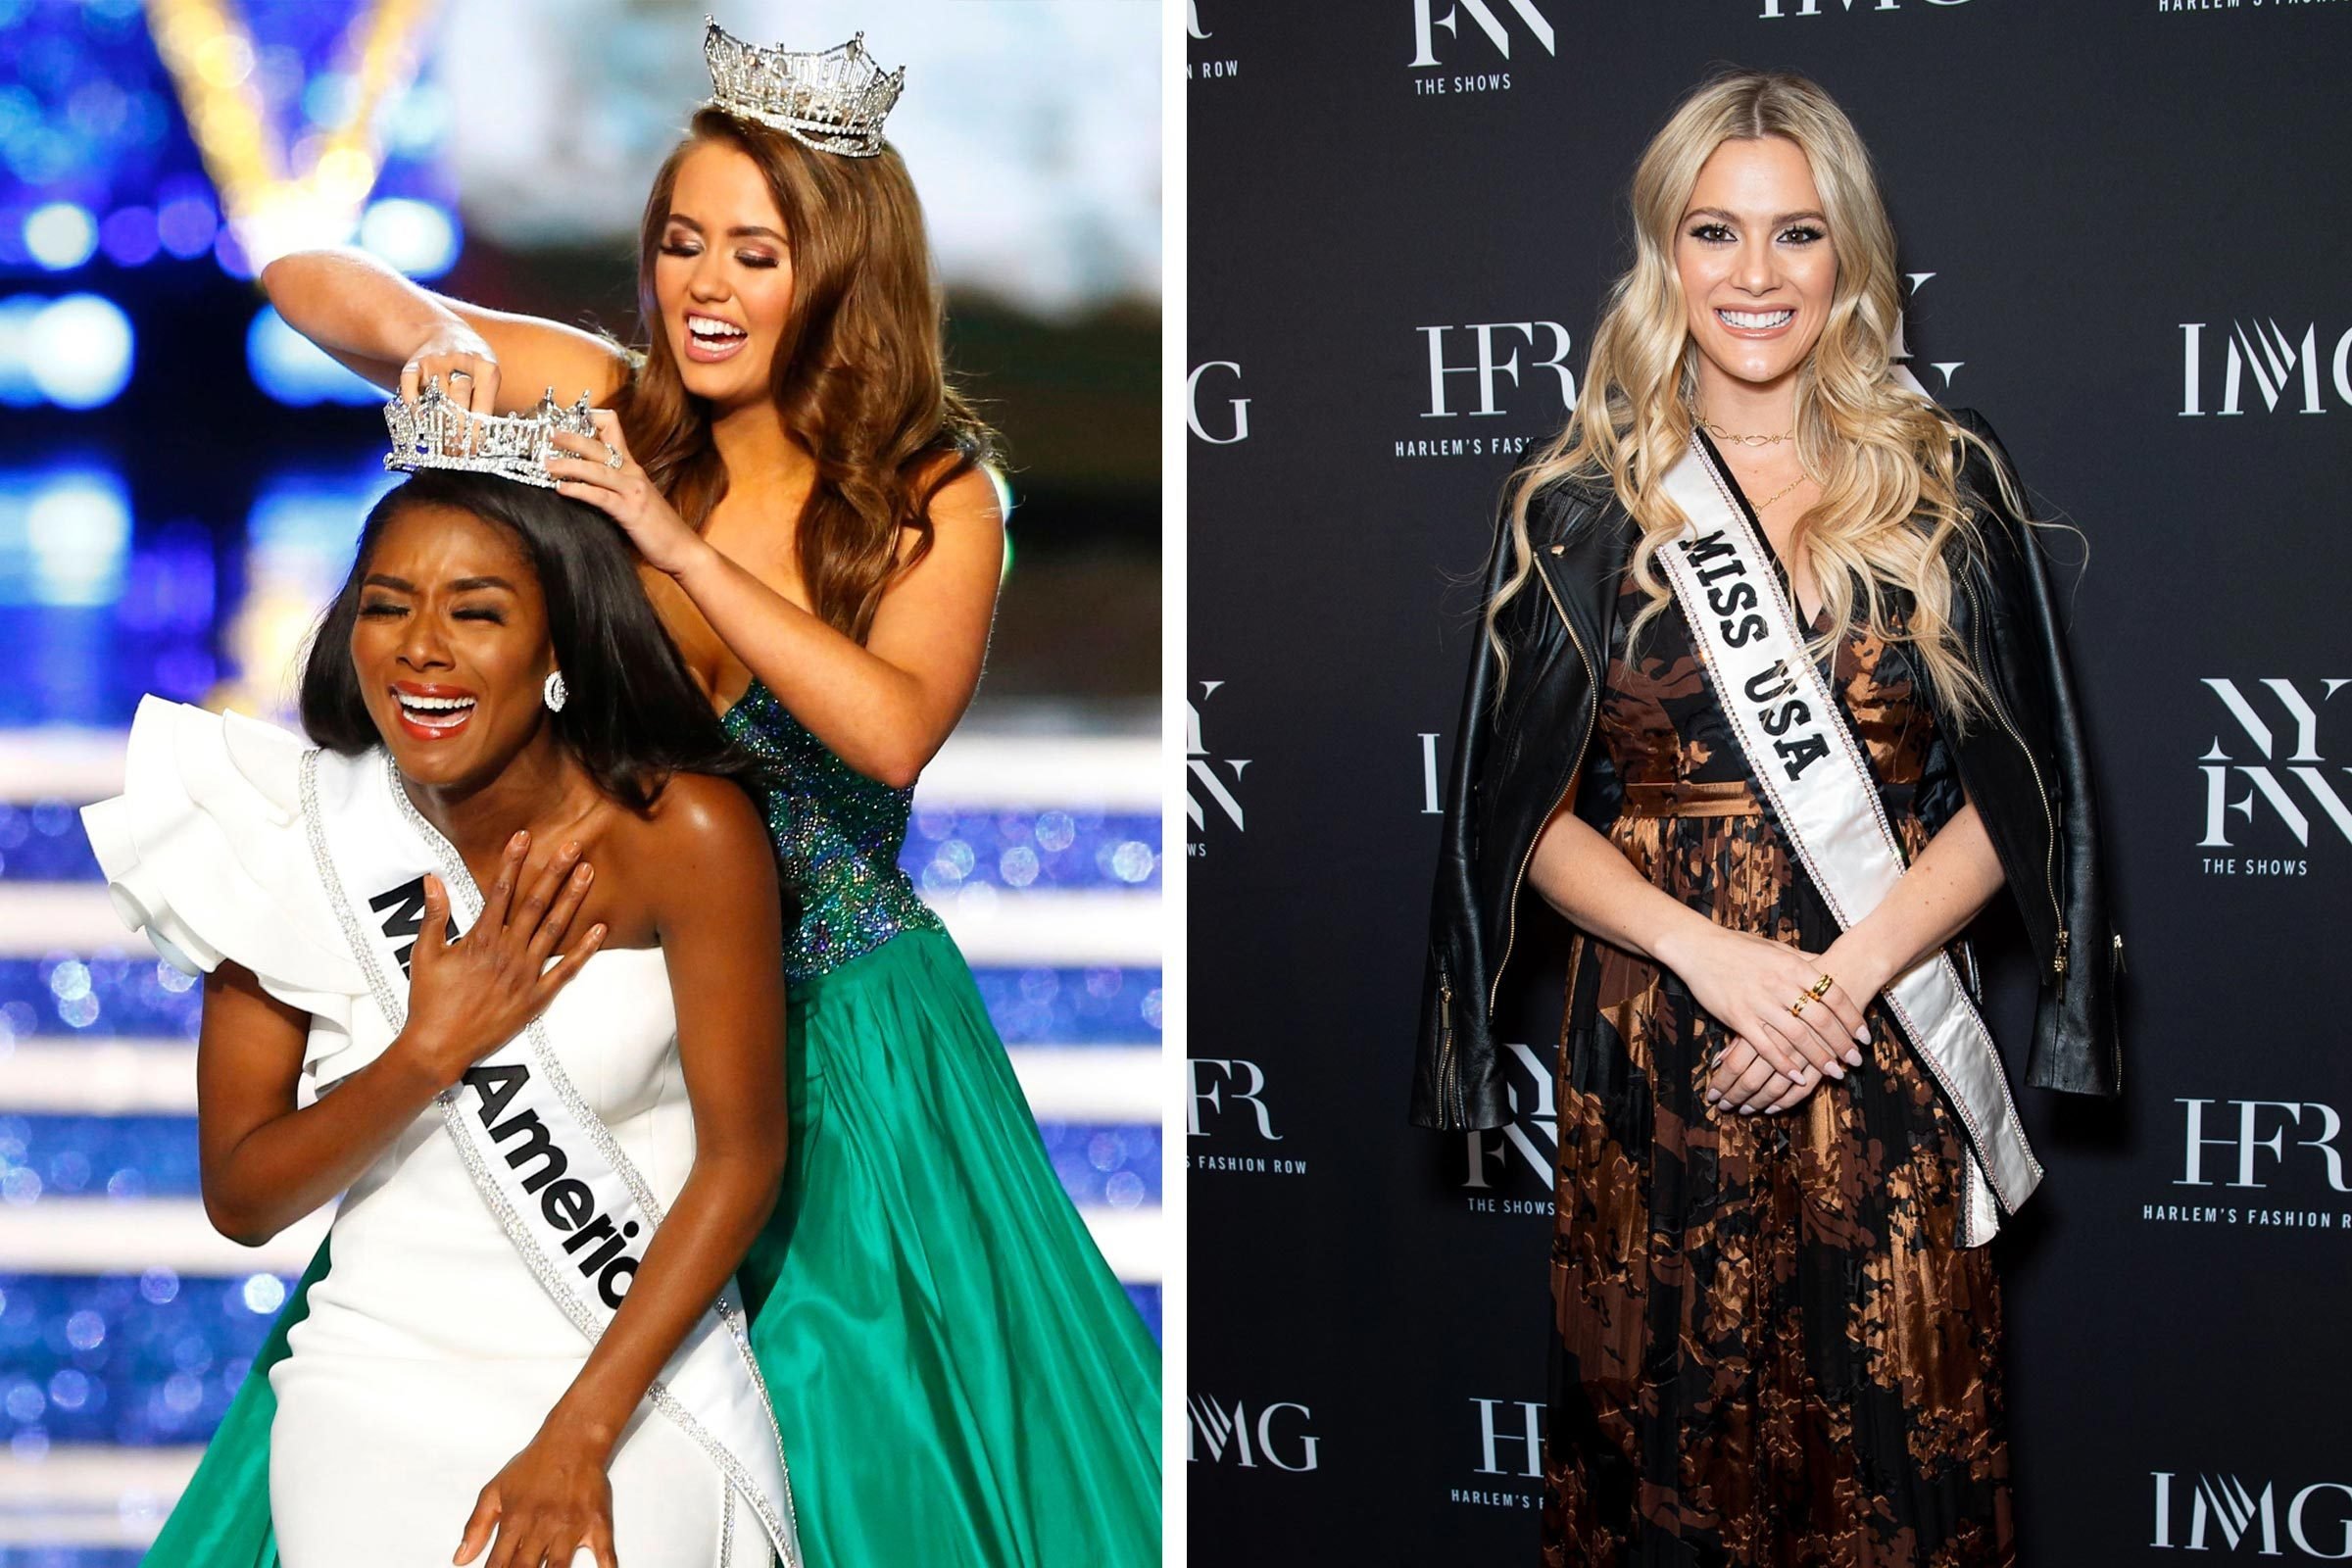 Miss Usa Vs  Miss America: What Is The Difference Involving Pageants?